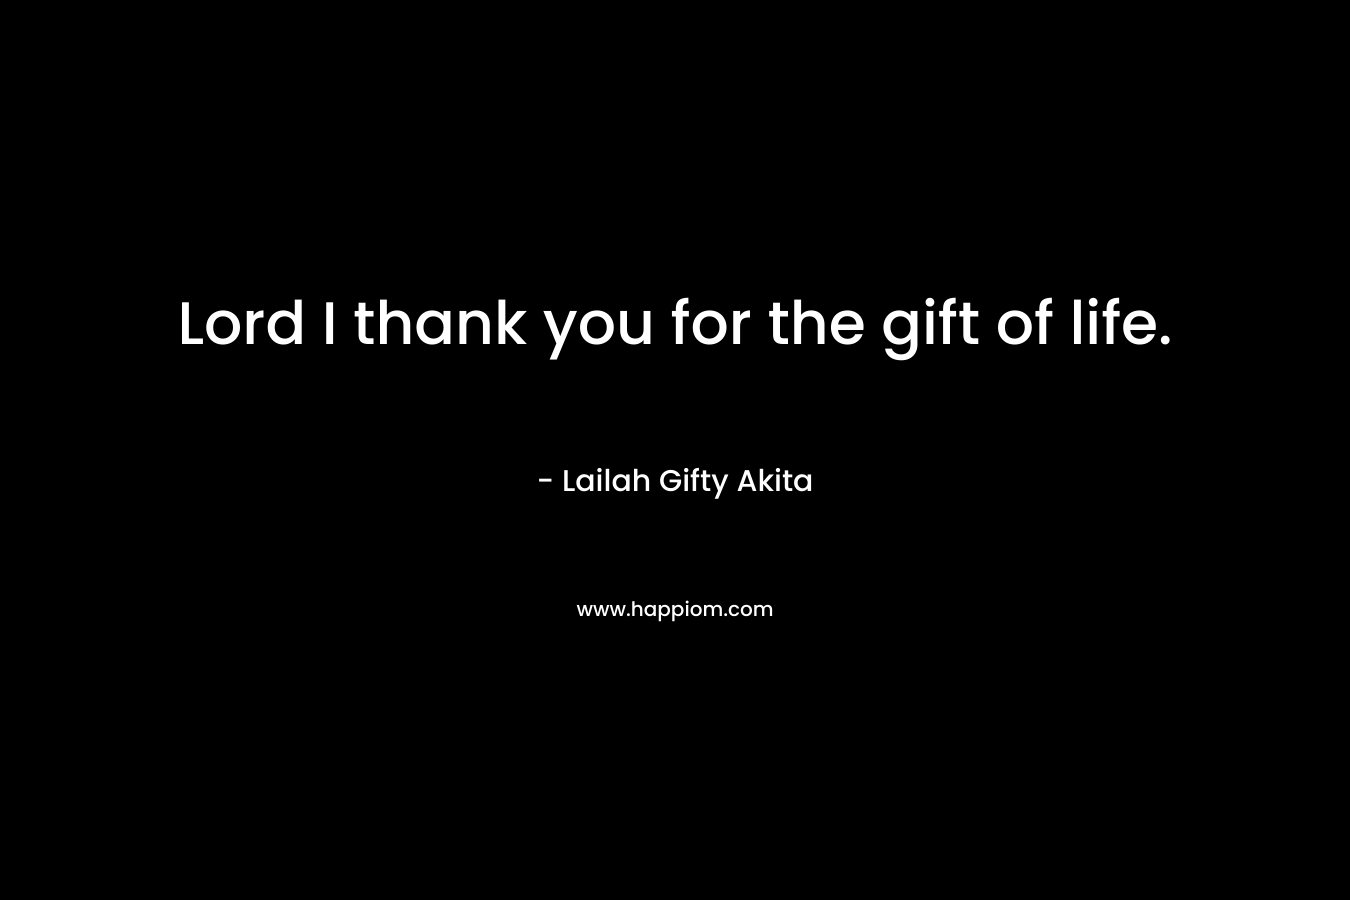 Lord I thank you for the gift of life.